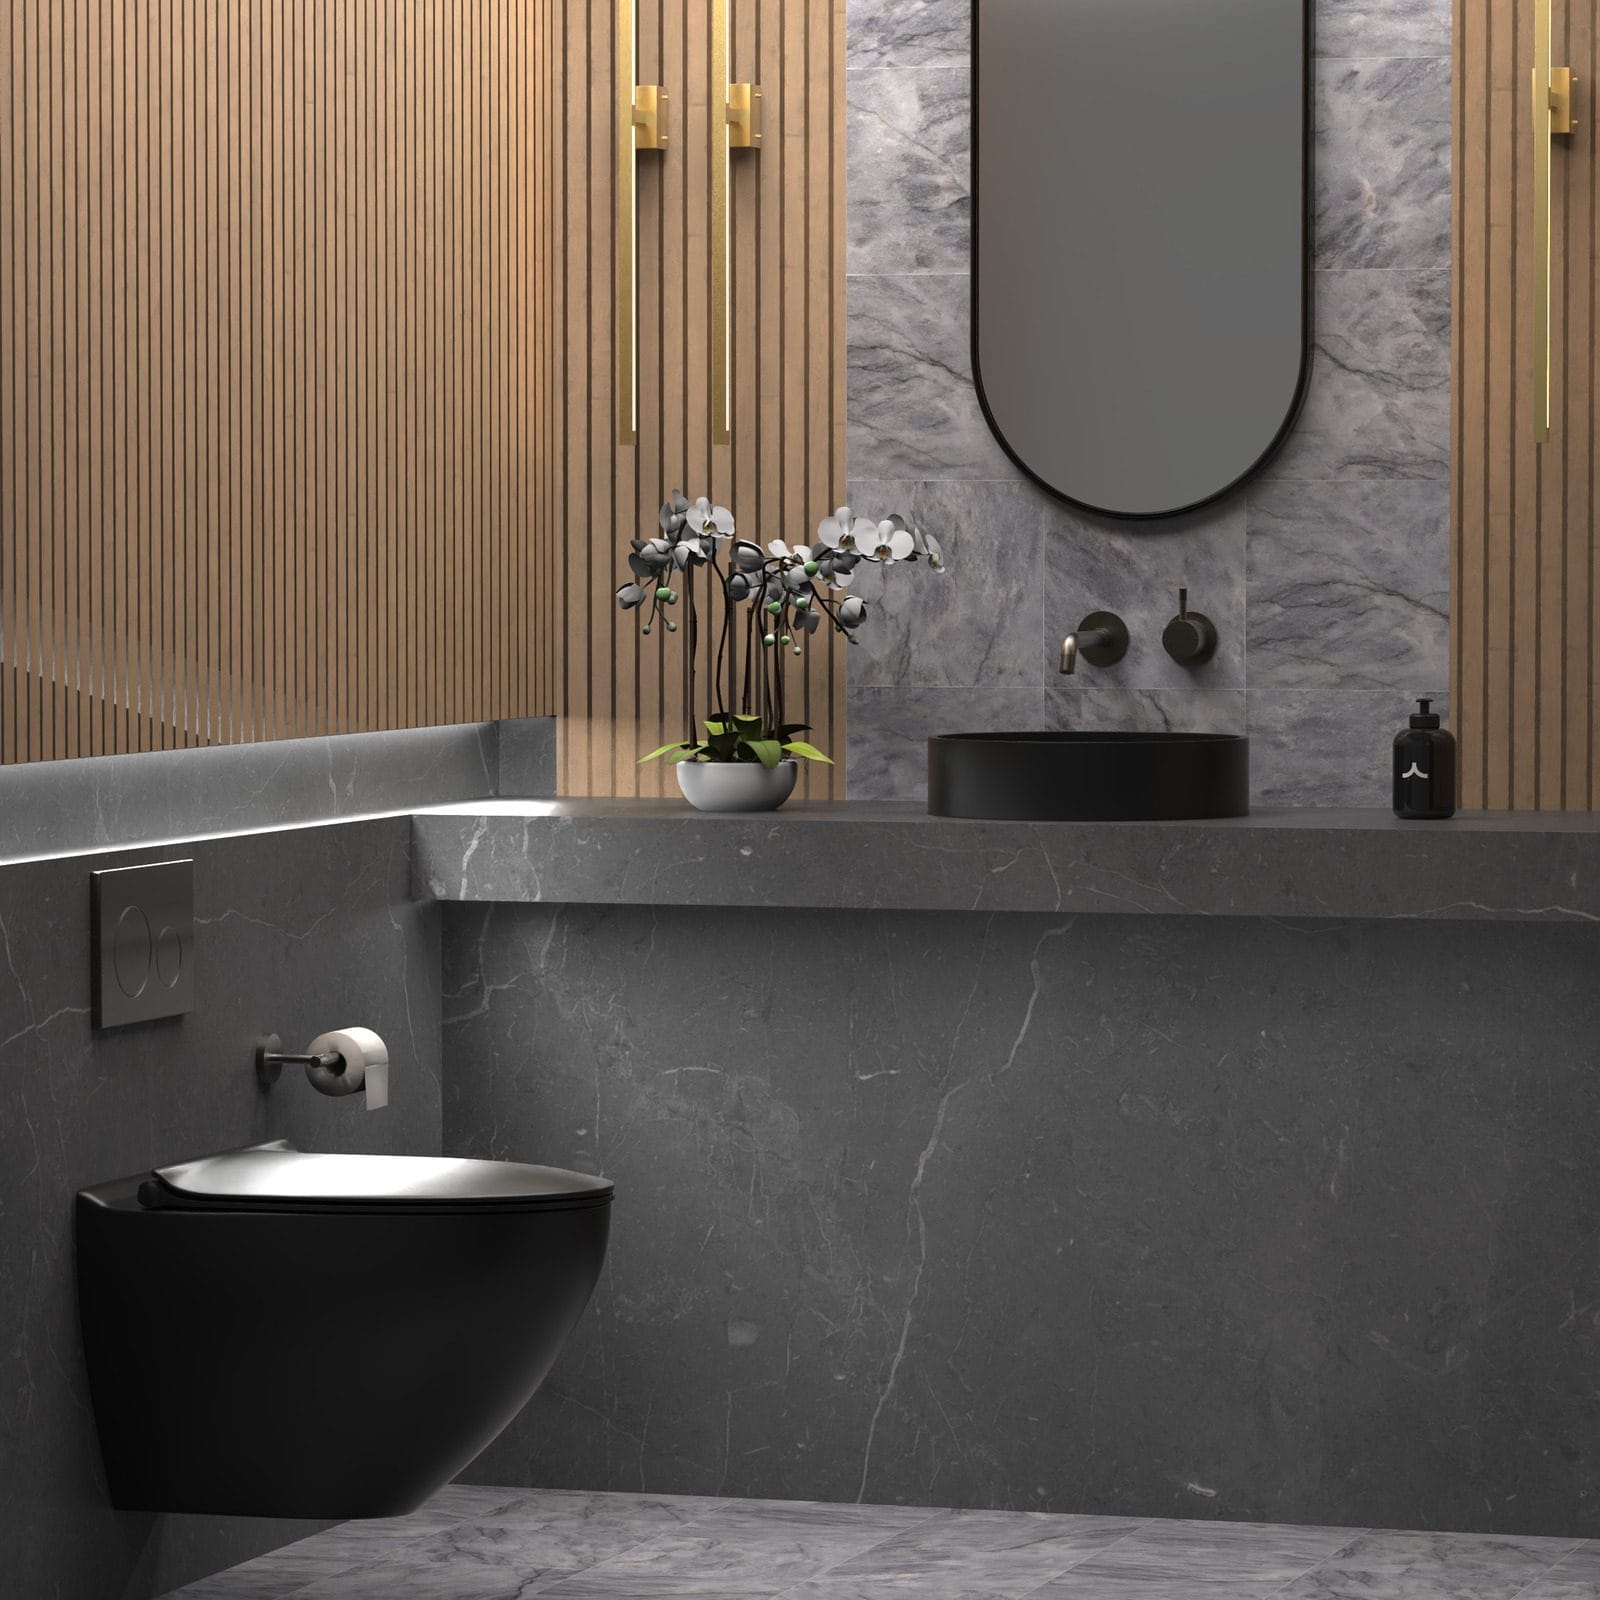 PAR TAPS. Copyright of PAR TAPS. Render of contemporary bathroom with dark tiled floors, walls, toilet, sink and mixers.